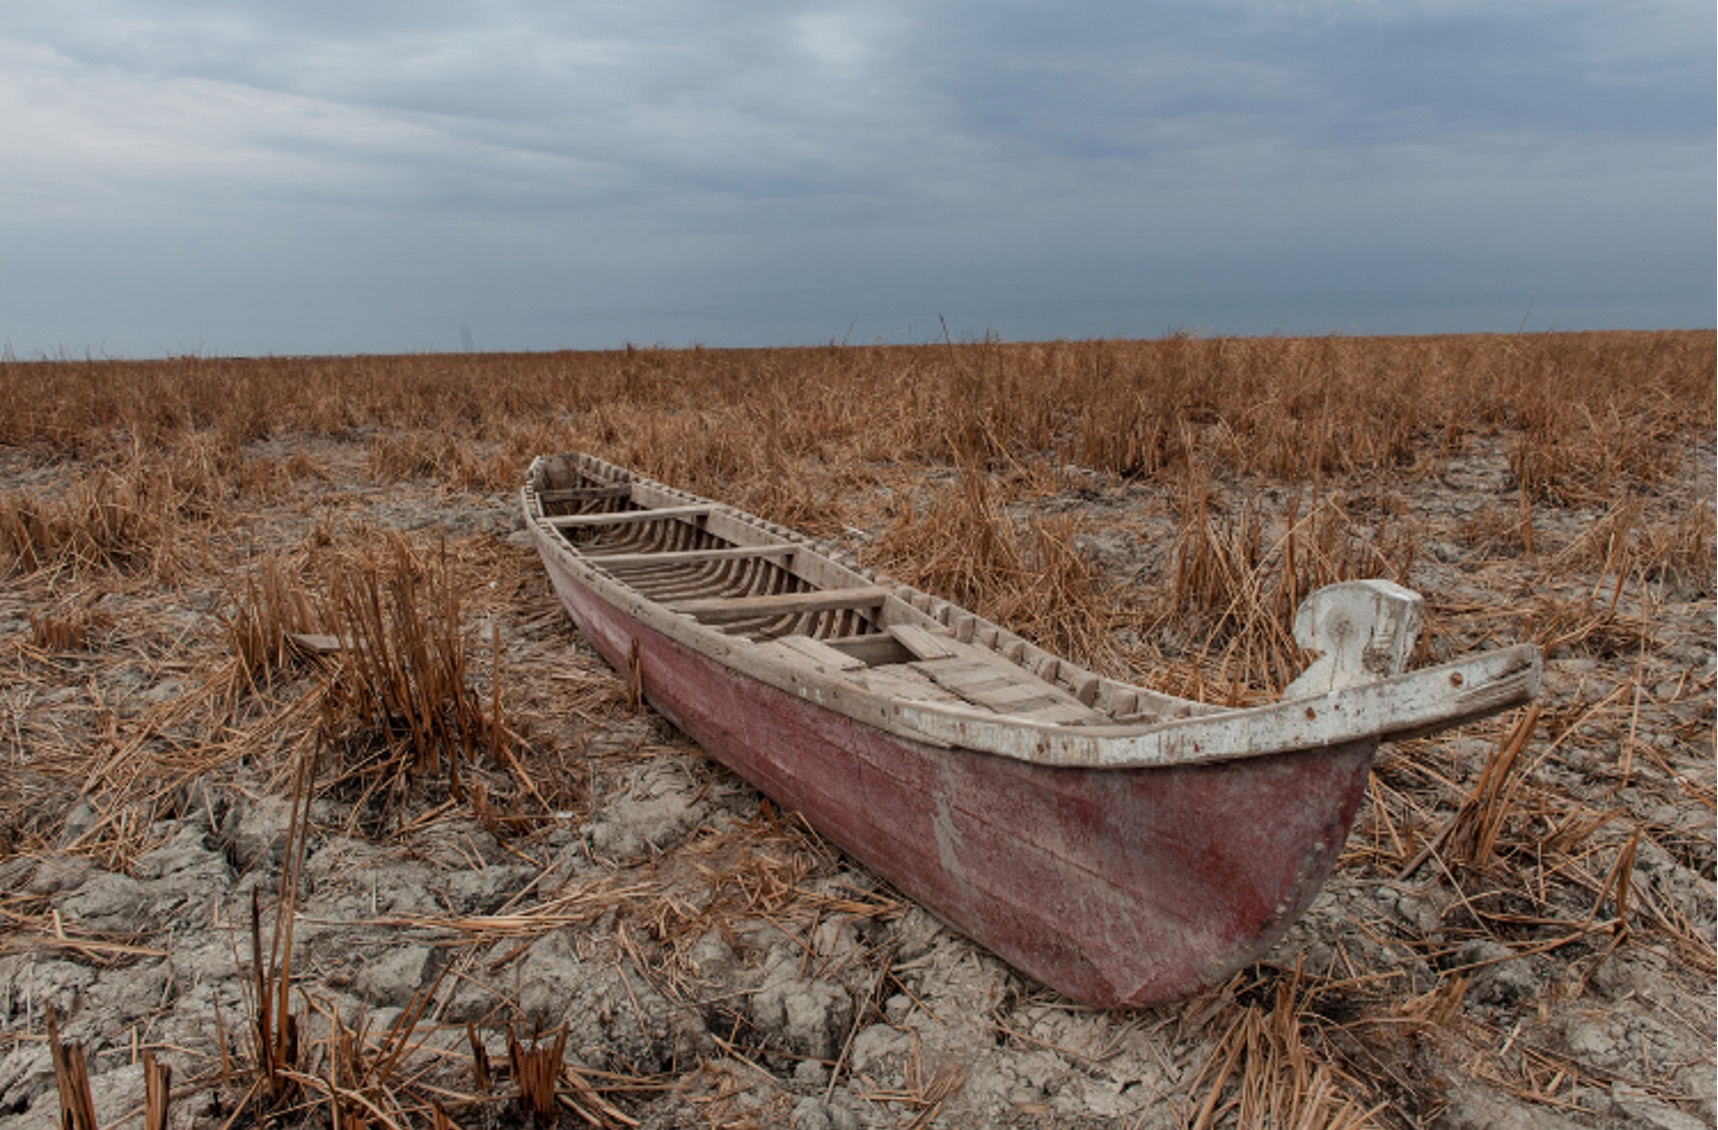 Boat on dried river bank